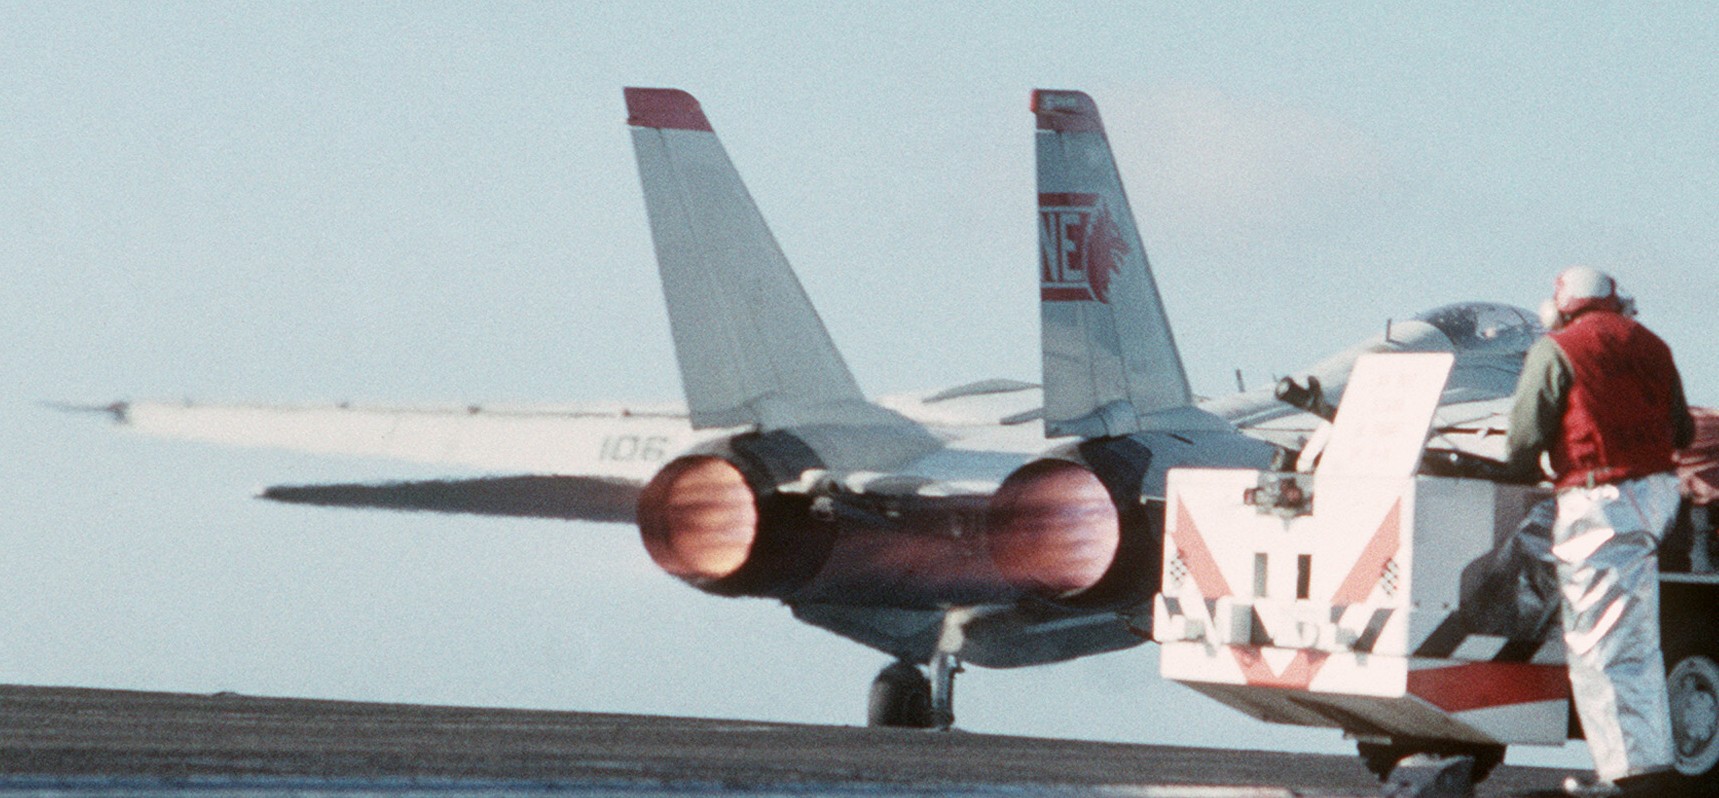 vf-1 wolfpack fighter squadron f-14a tomcat carrier air wing cvw-2 uss ranger cv-61 56